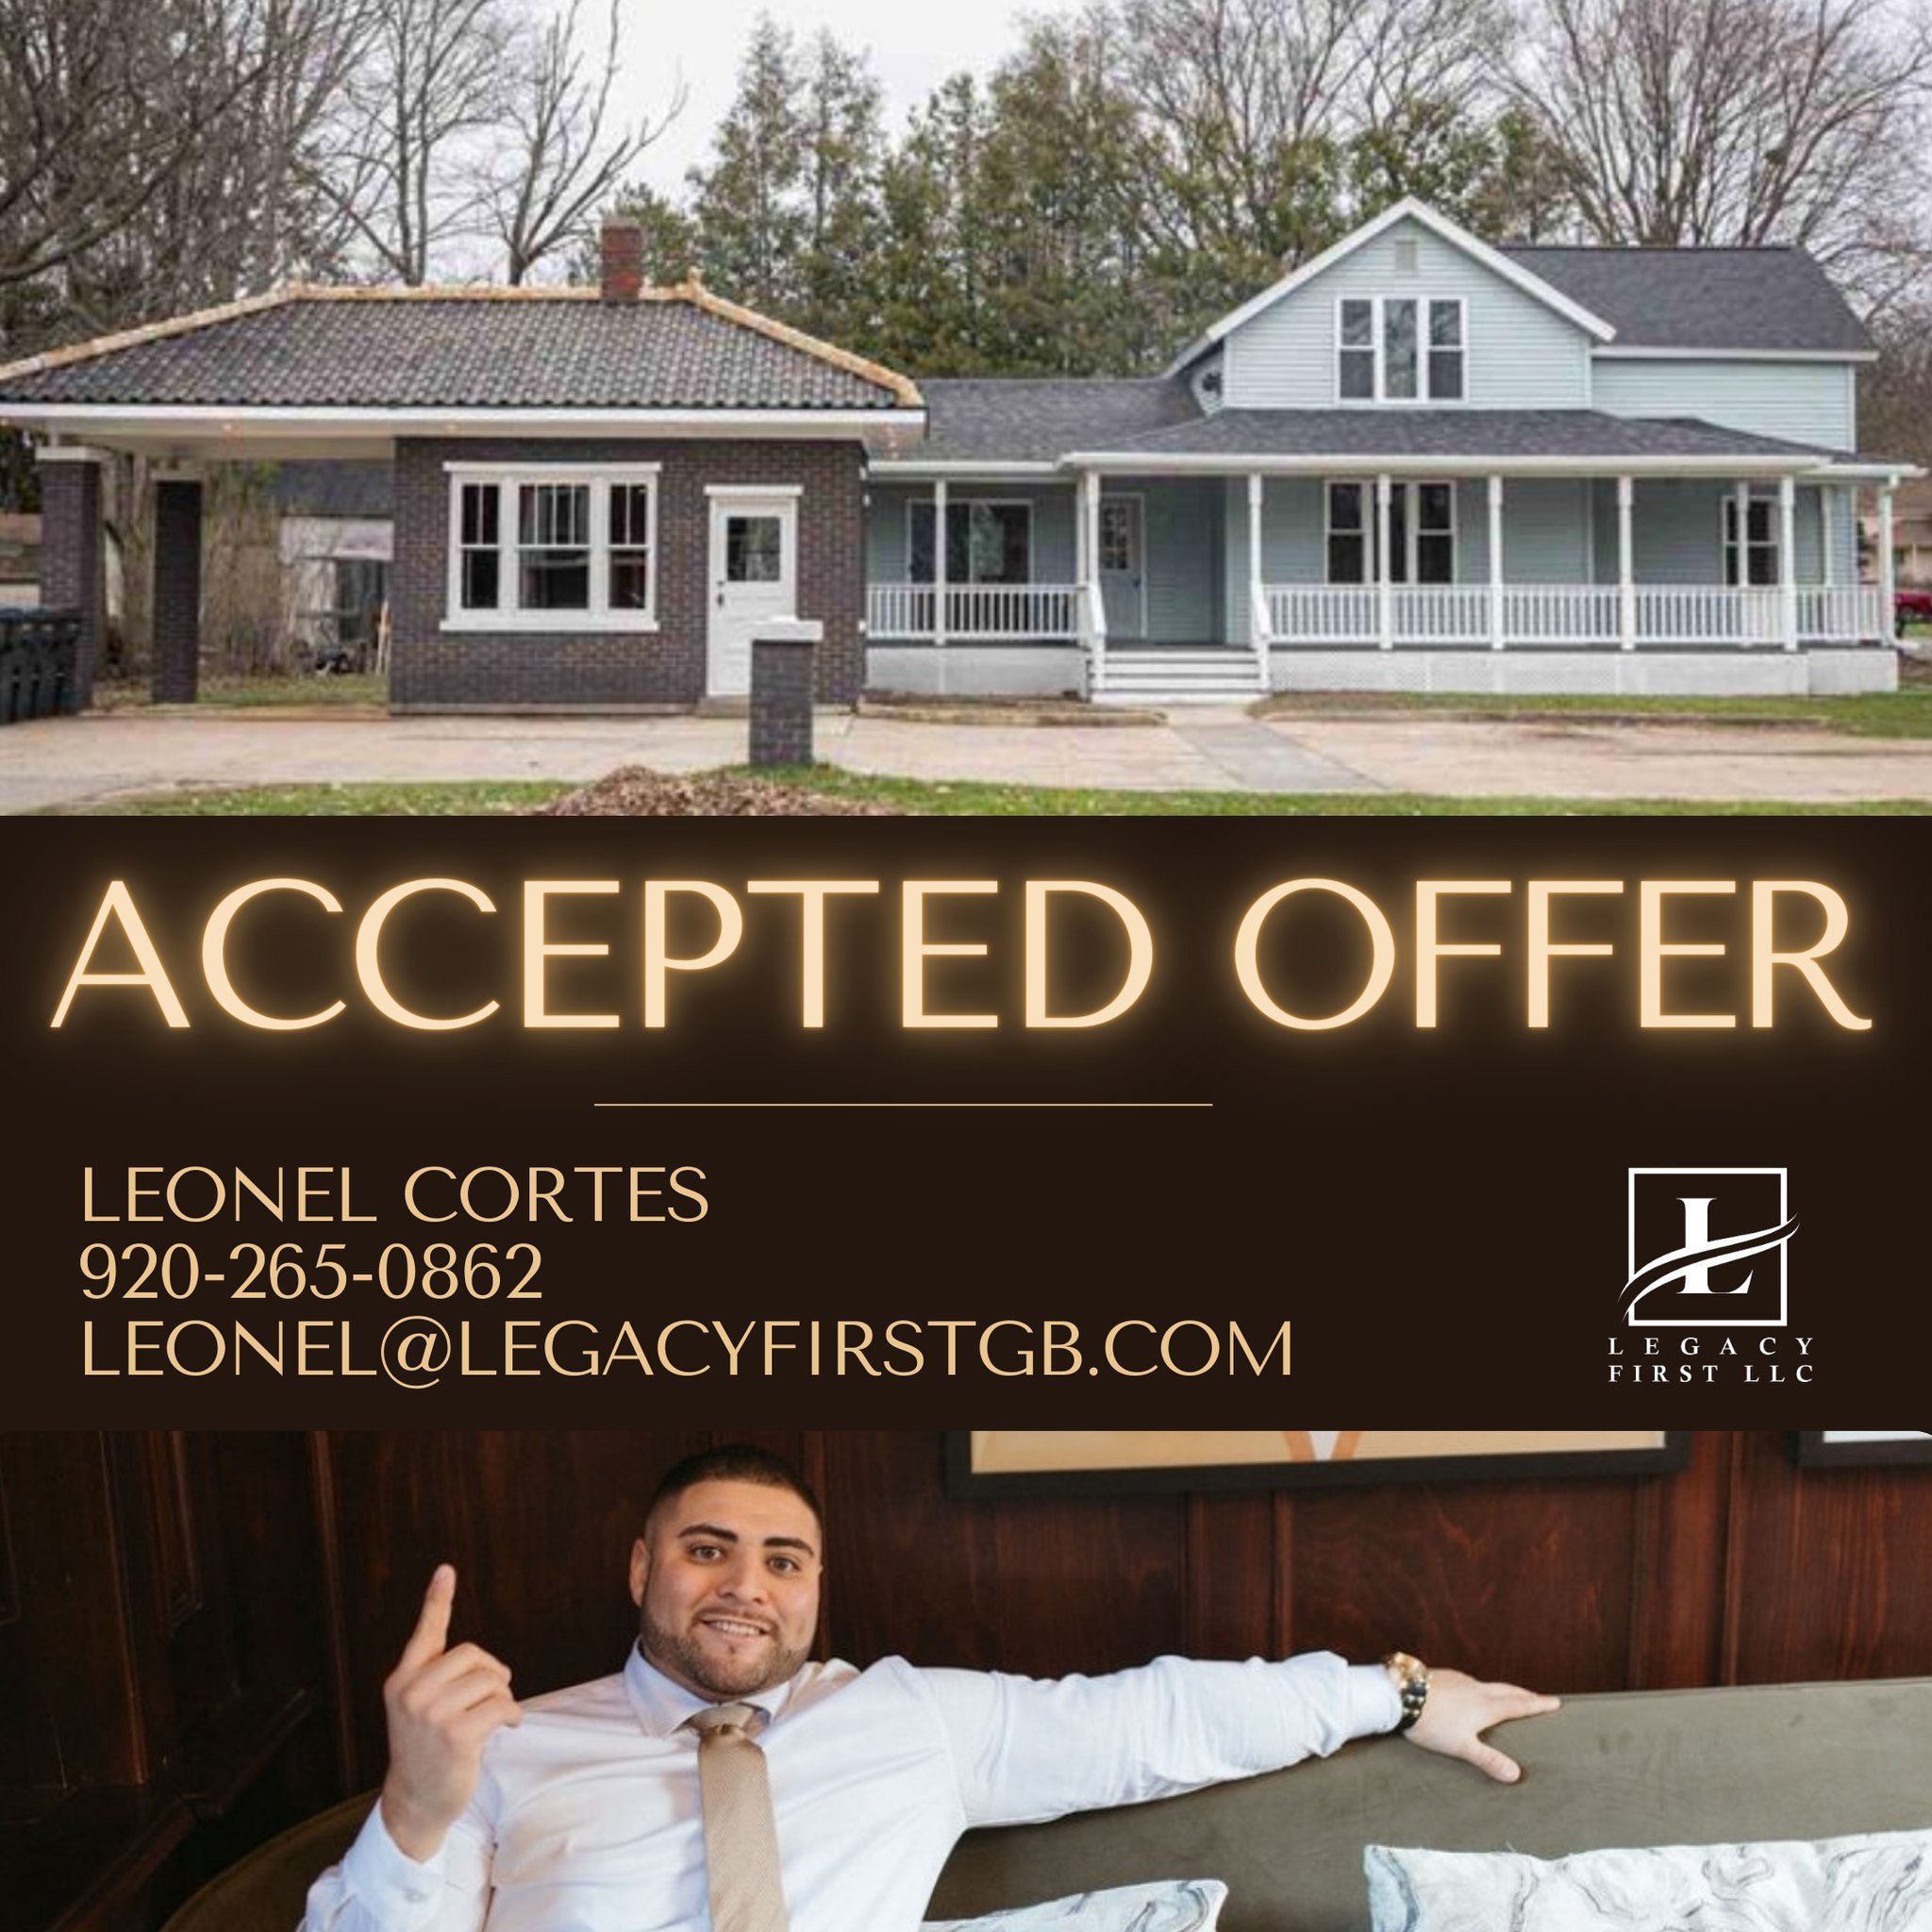 🎉 ACCEPTED OFFER! 🏡

After an intense search and navigating through a challenging market, I'm thrilled to announce that my amazing clients have just had their offer accepted on their dream home! 🌟

This journey to find the perfect home wasn't easy